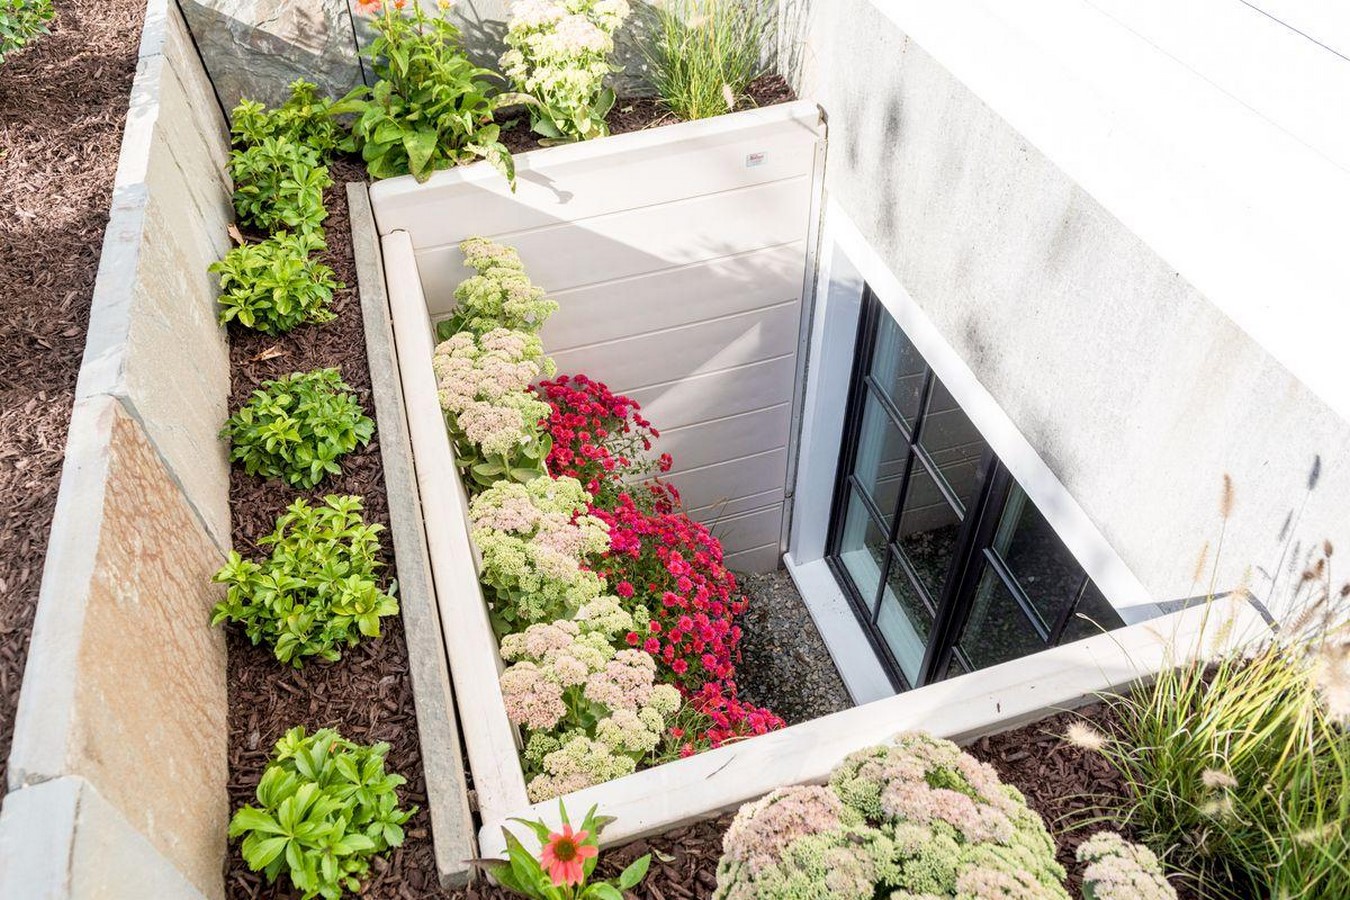 Egress terraced window provides natural ventilation and outdoor access_©www.thisoldhouse.com